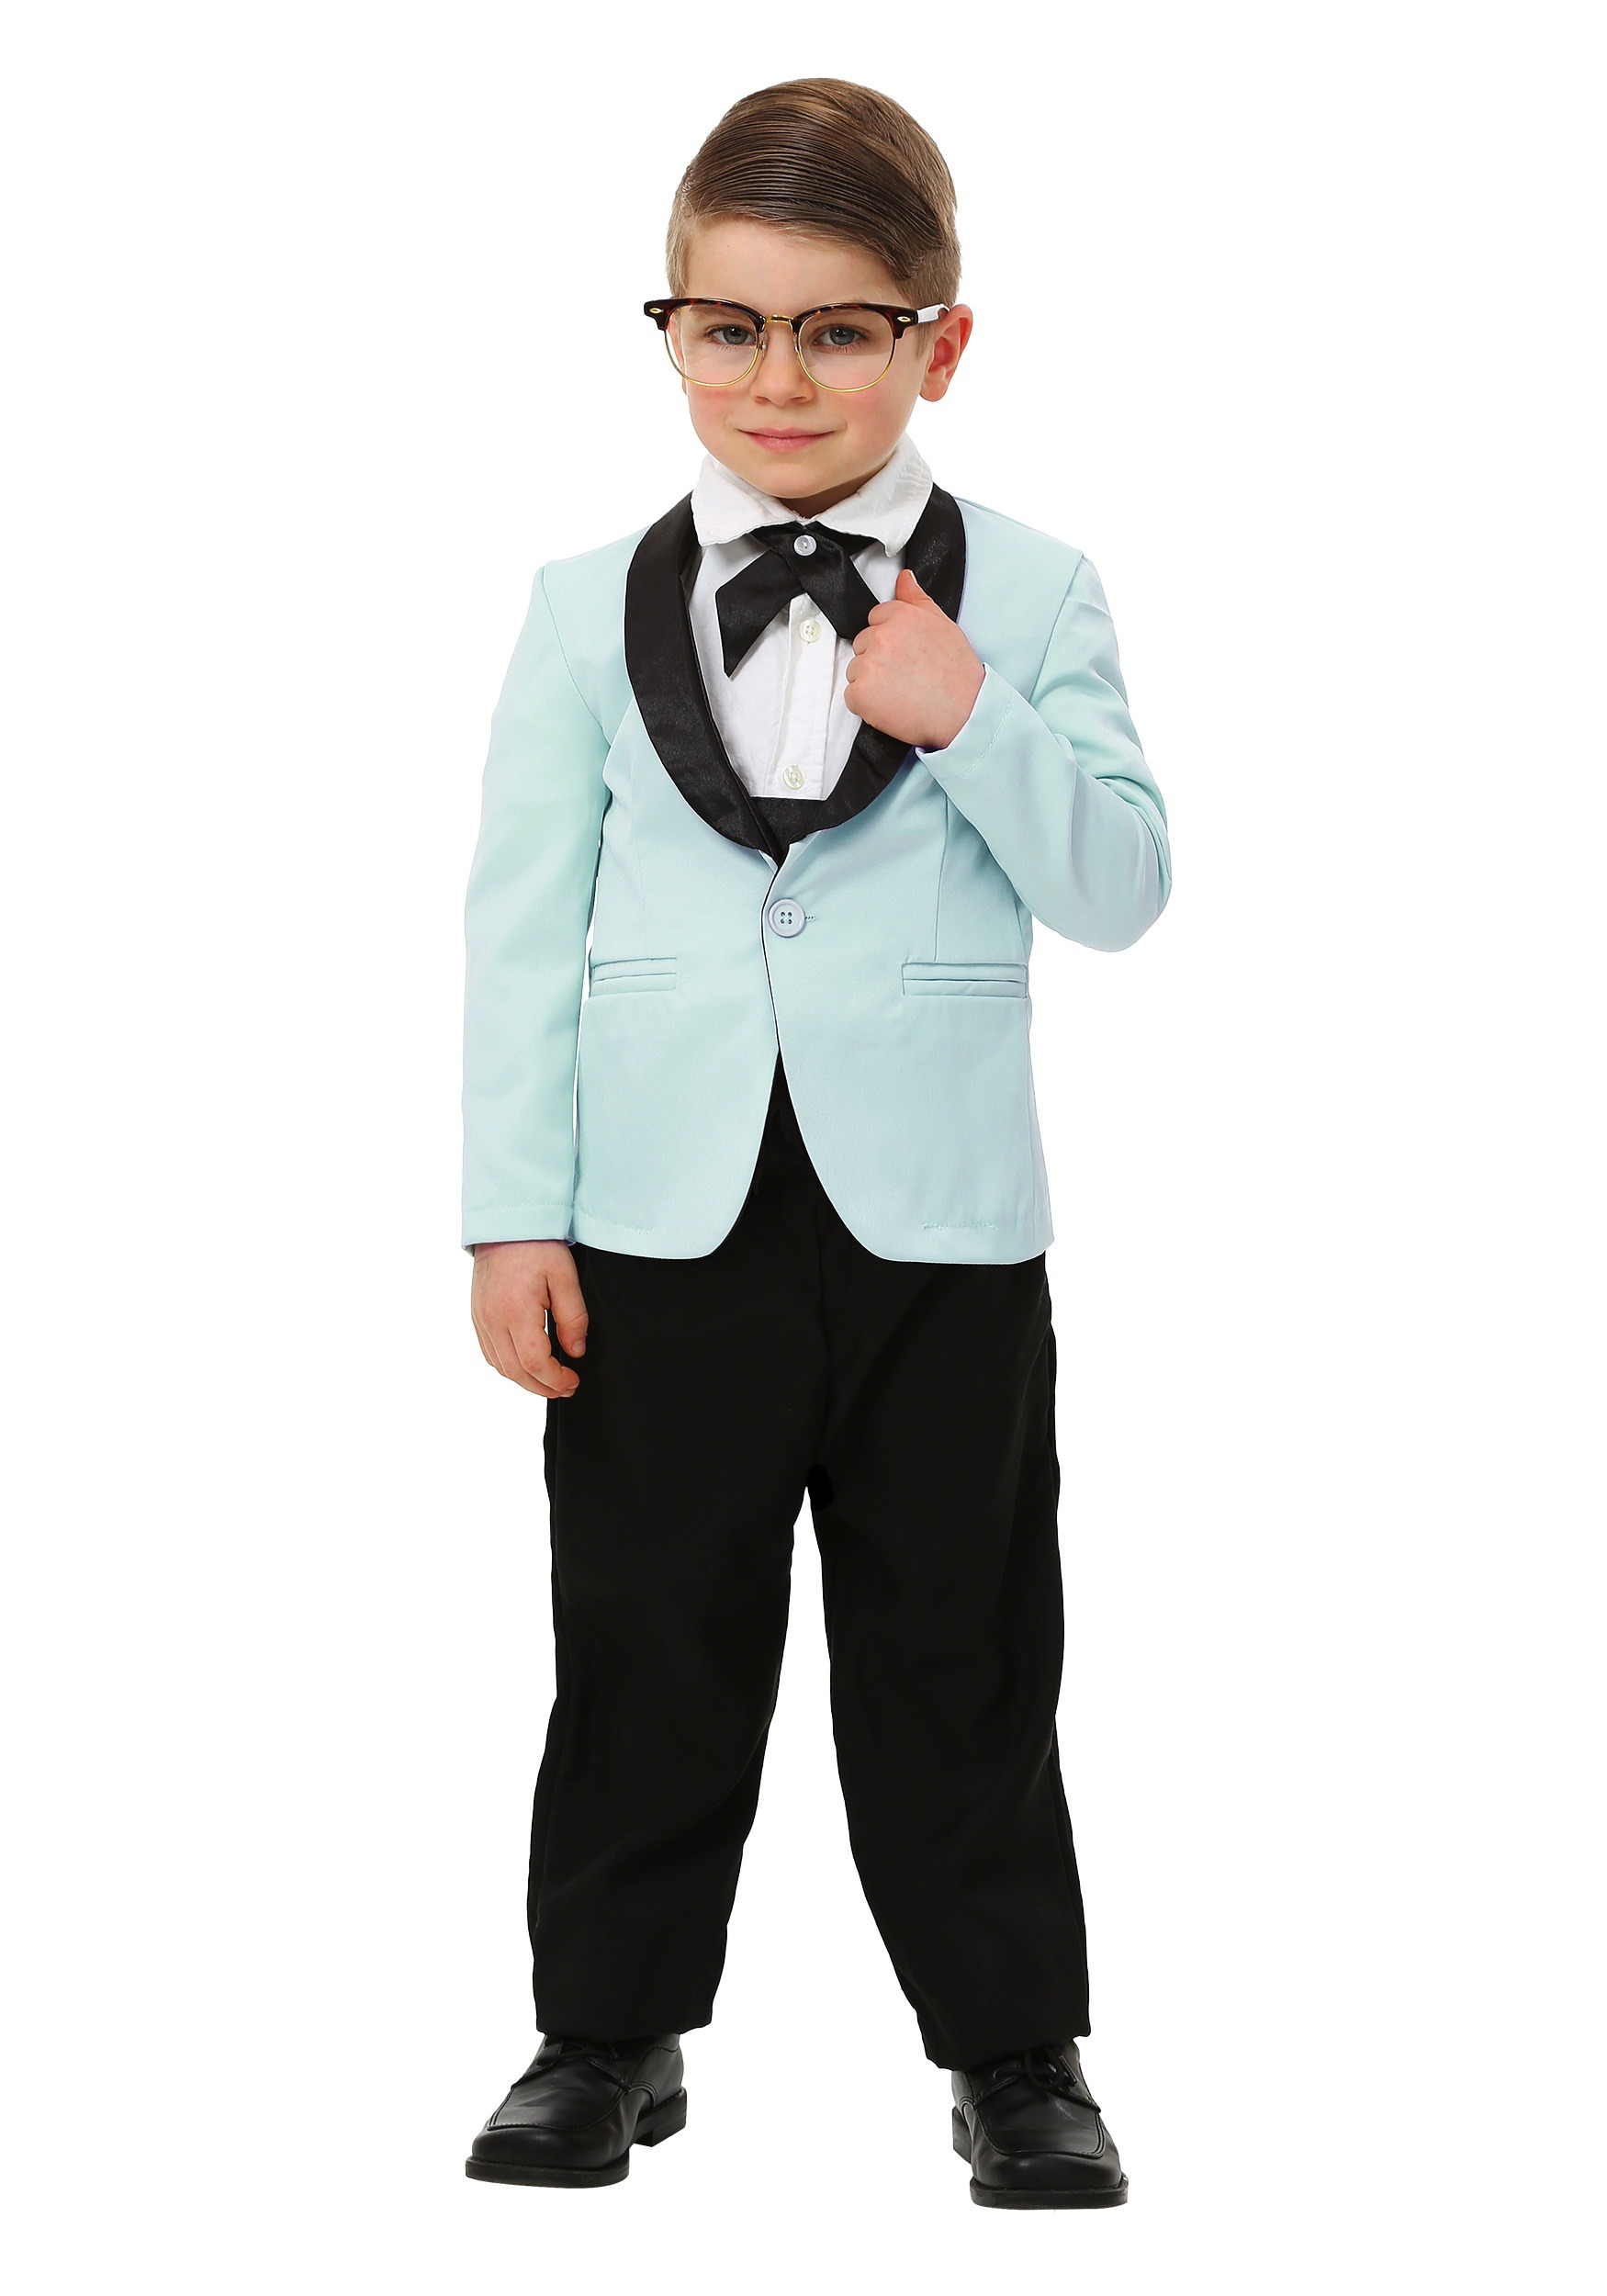 https://images.halloweencostumes.com/products/38193/1-1/toddler-mr-50s-costume.jpg